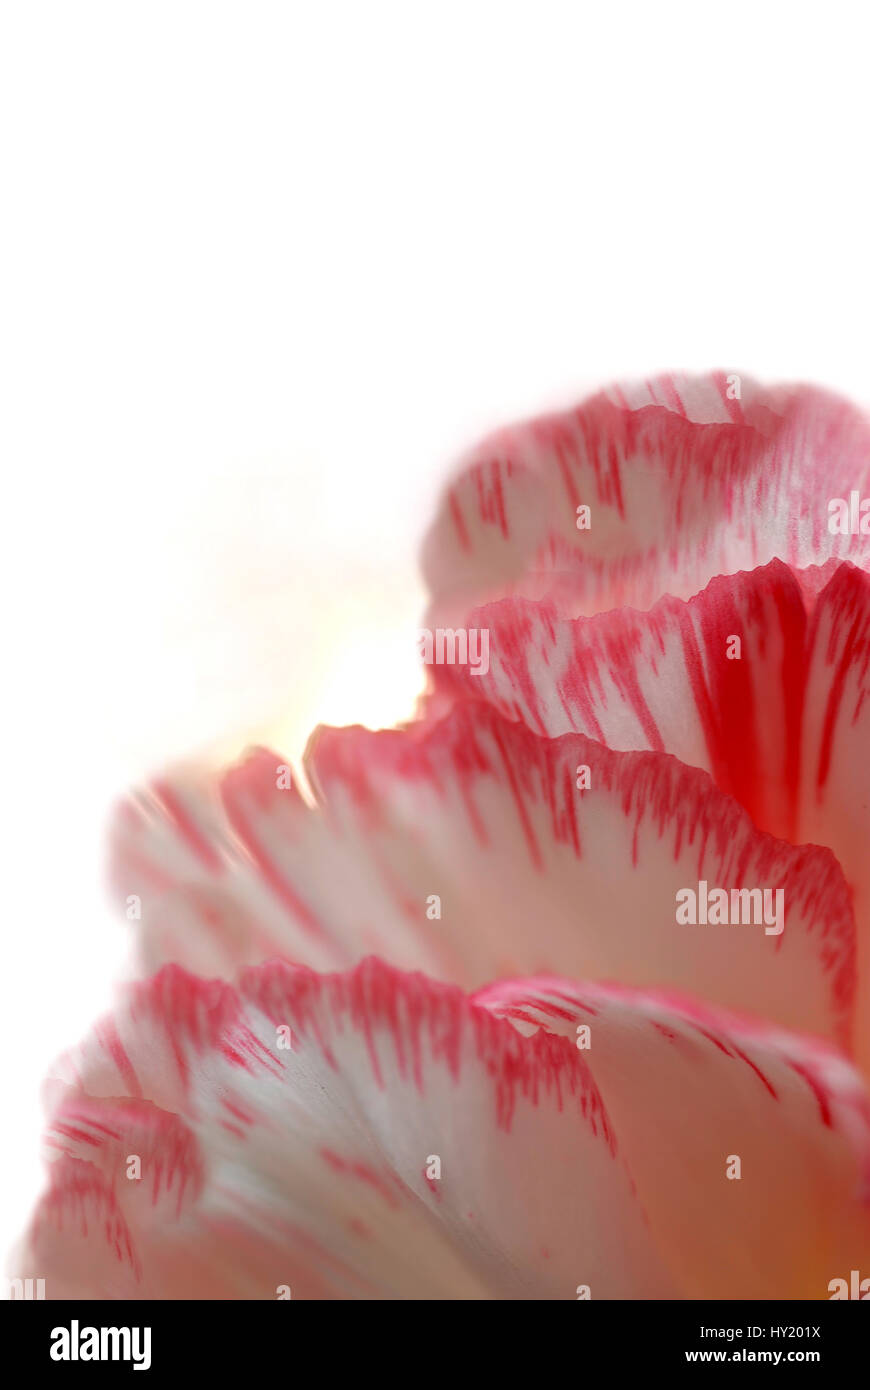 This stock photo shows the abstract detail of pink carnation petals with a shallow depth of field still showing some of the structure of the petals. Stock Photo